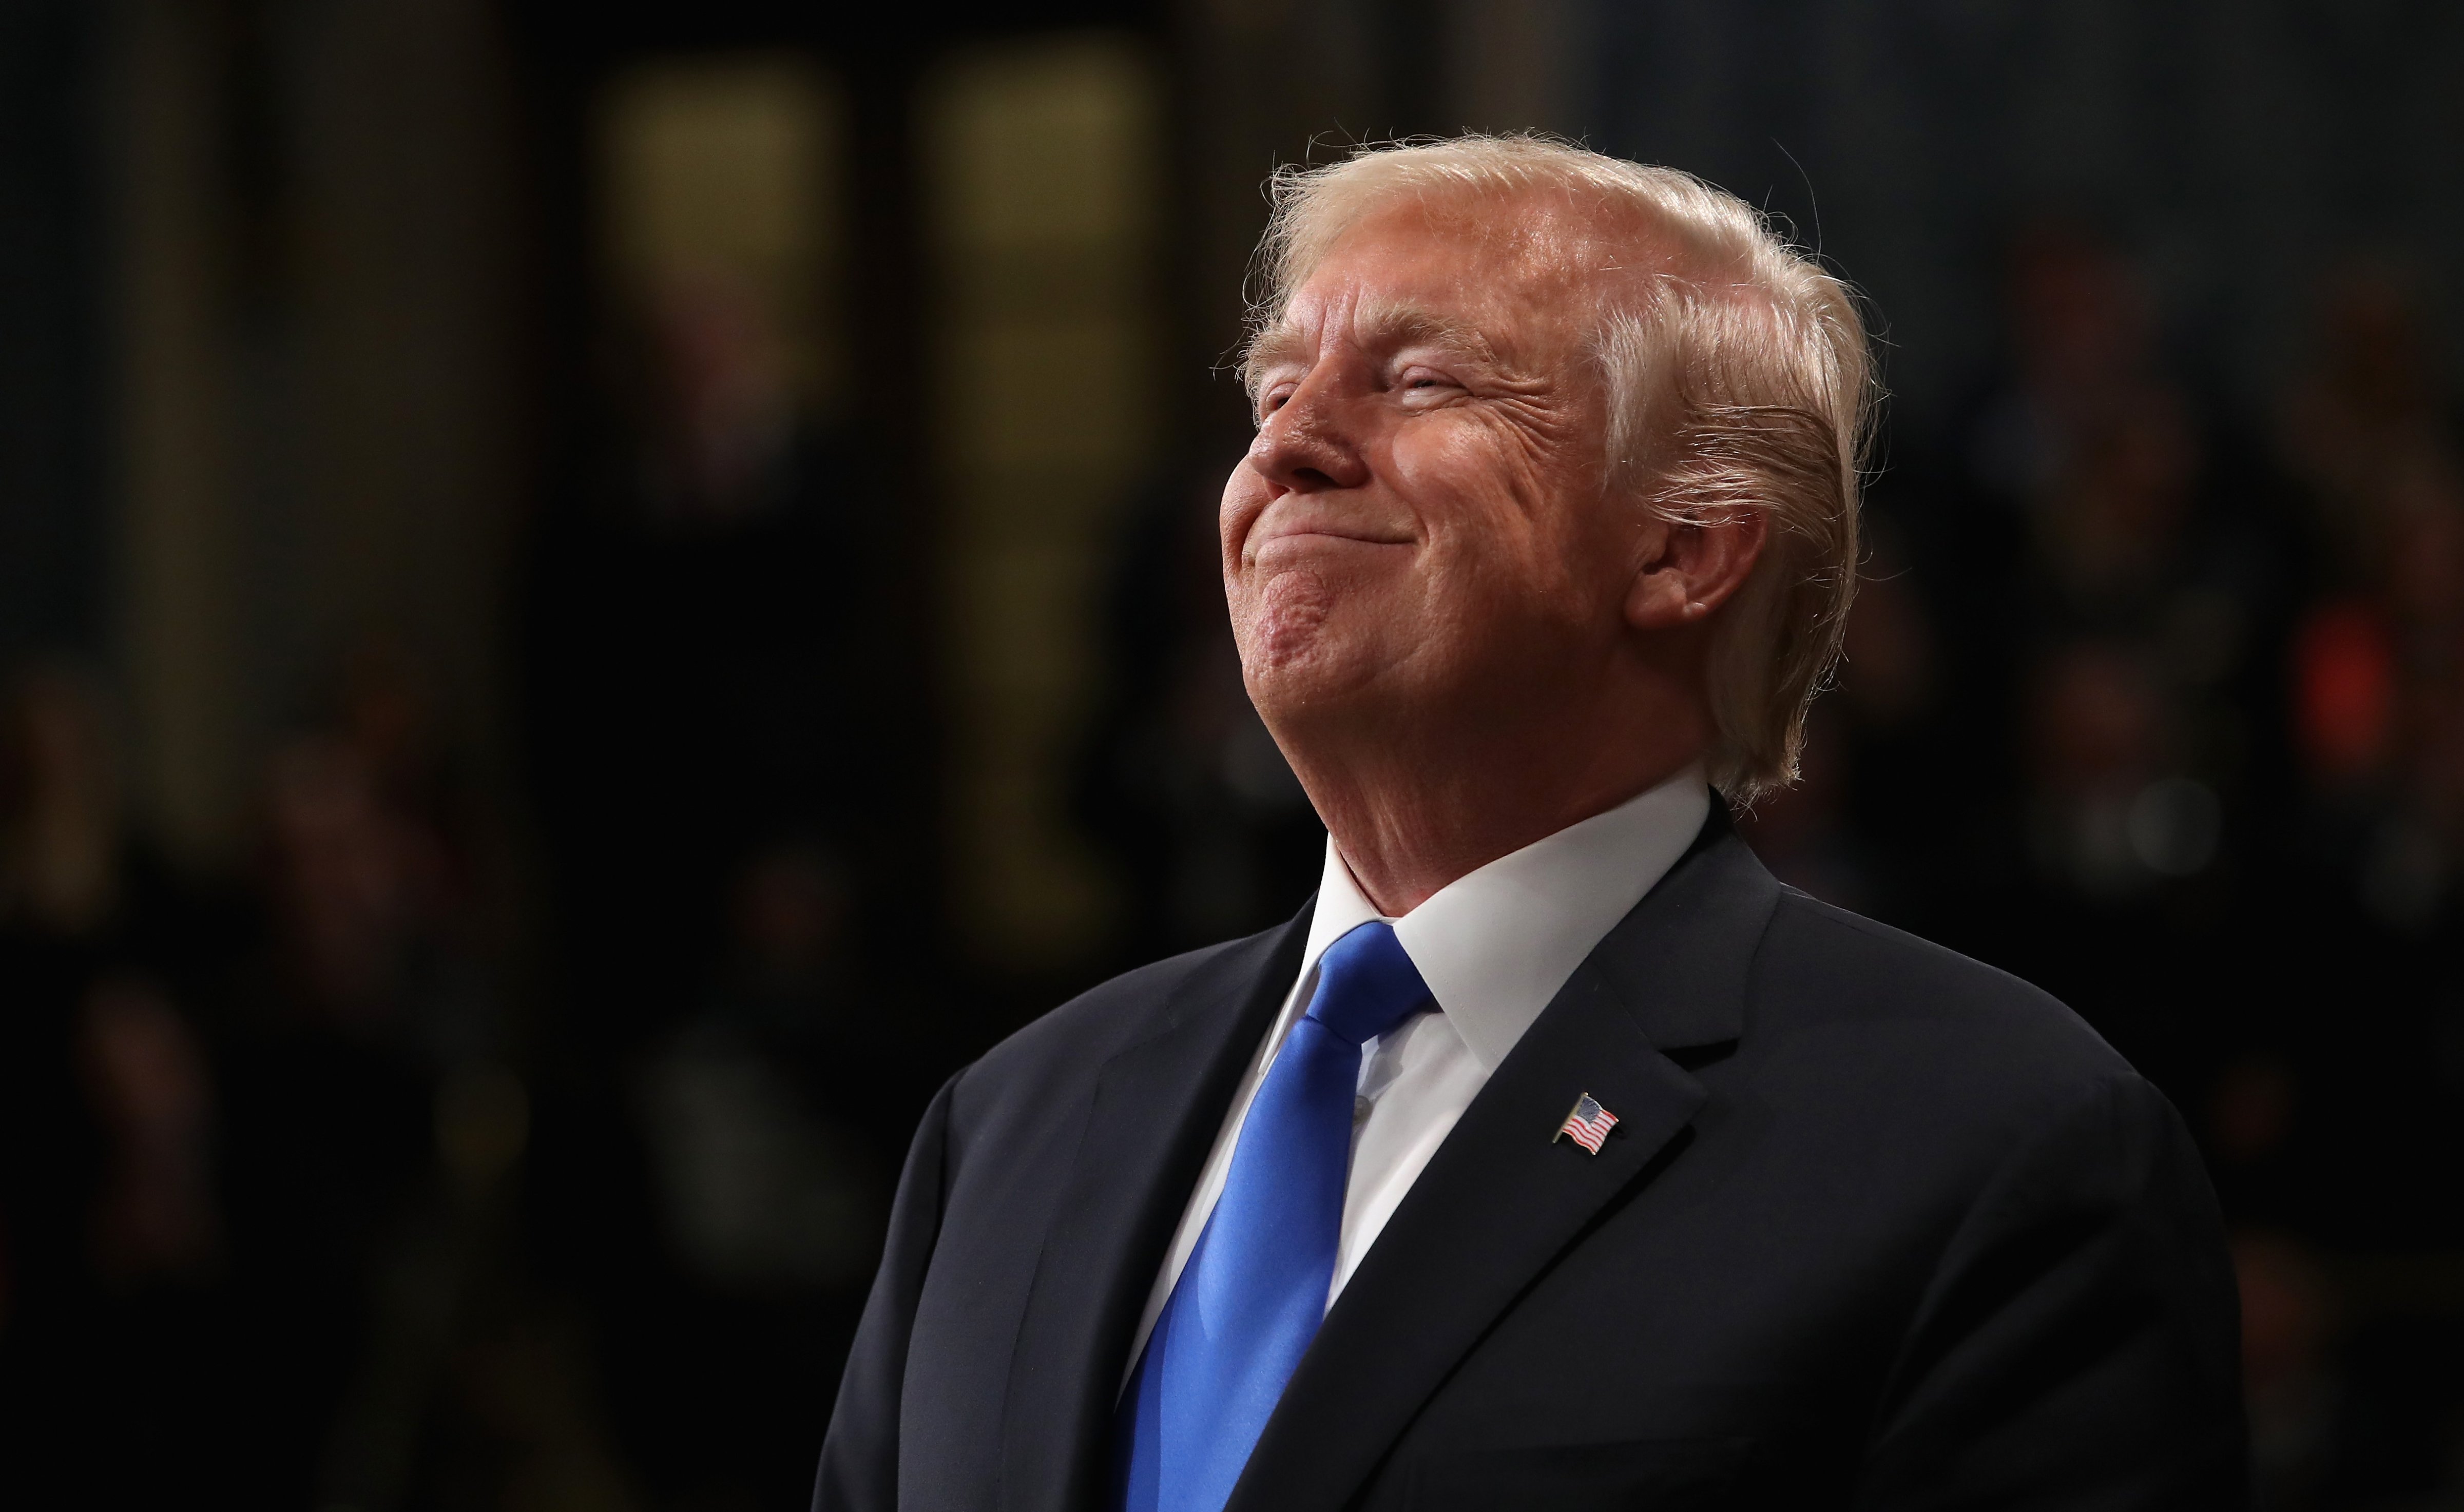 President Donald Trump smiles while delivering the State of the Union address. (Bloomberg&mdash;Bloomberg via Getty Images)